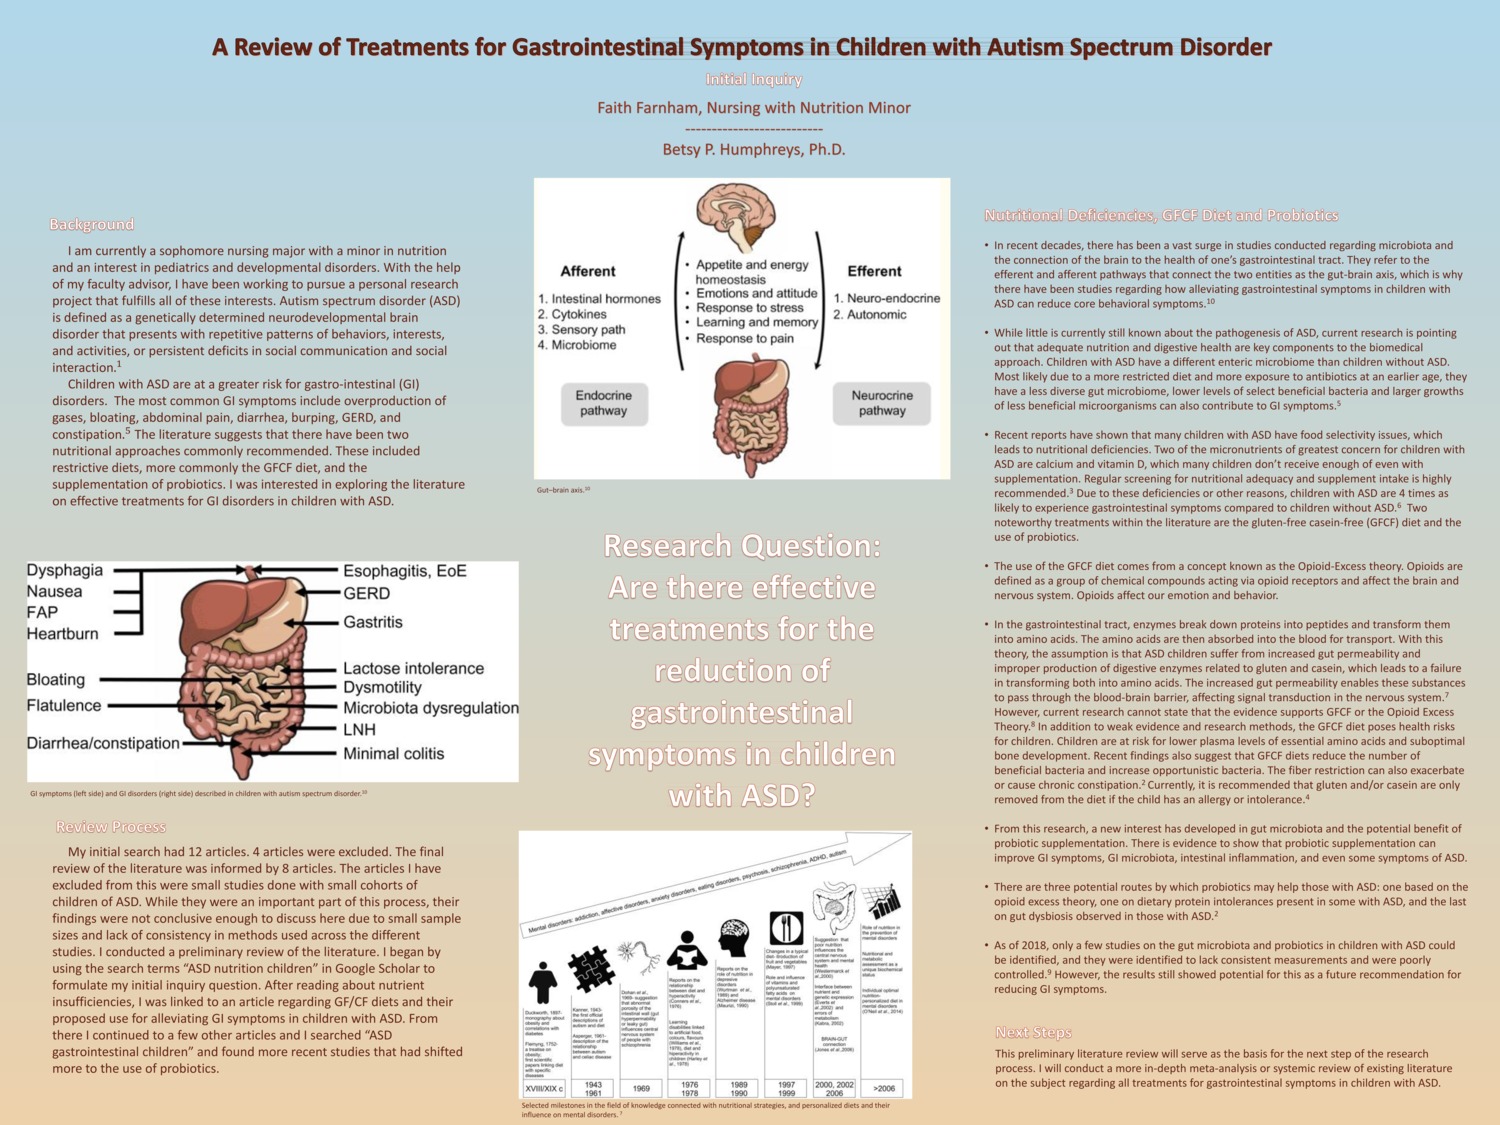 A Review Of Treatments For Gastrointestinal Symptoms In Children With Autism Spectrum Disorder by fmf1001